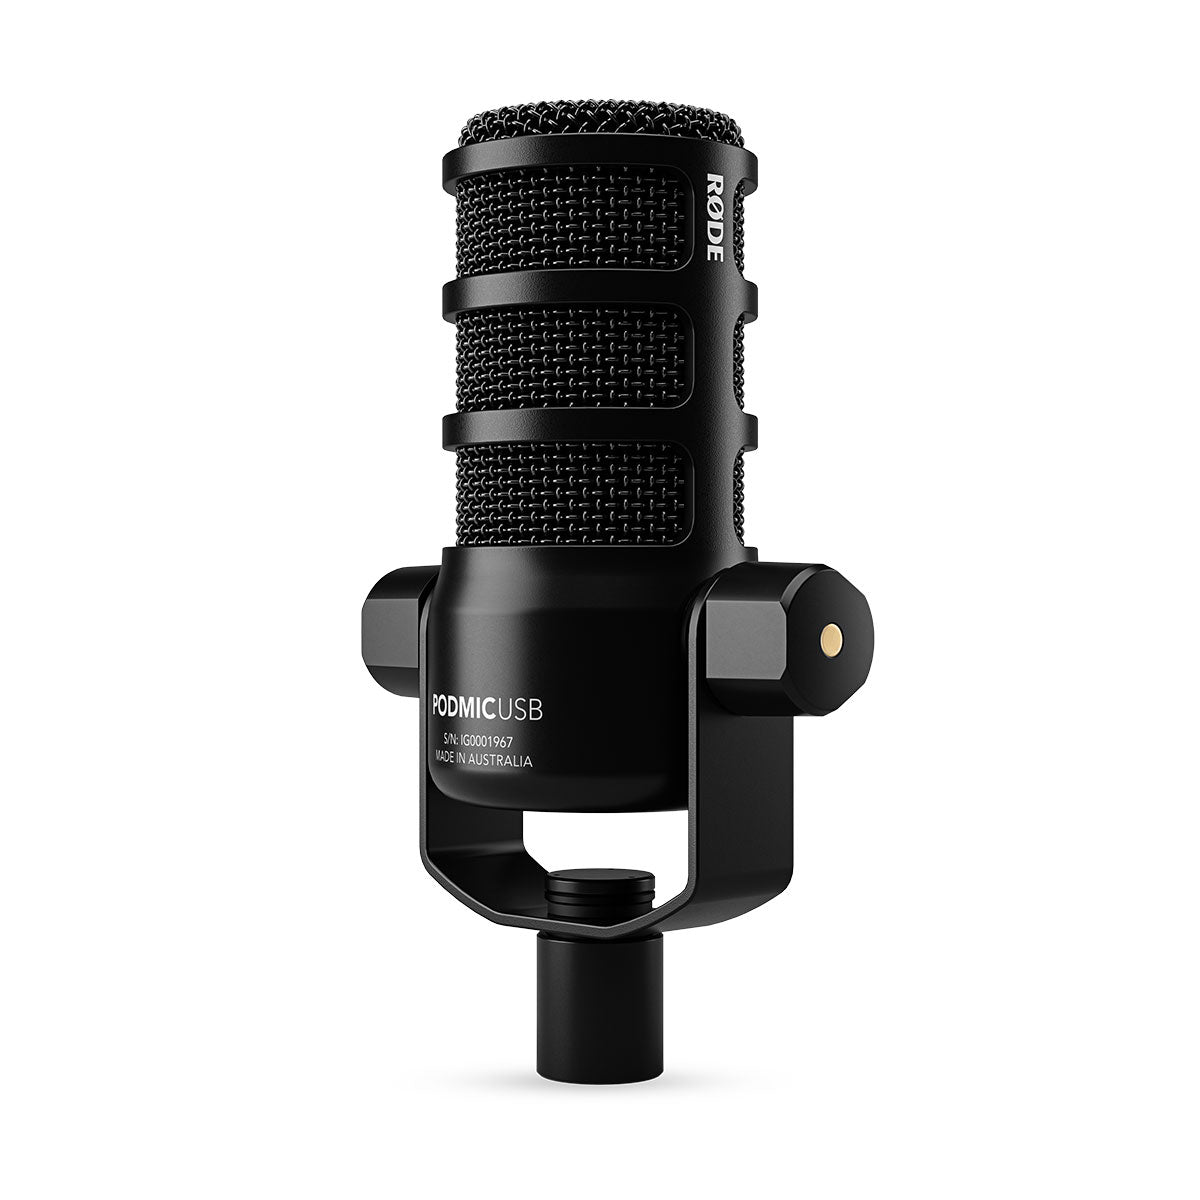 Rode PODMIC USB - Dynamic Microphones